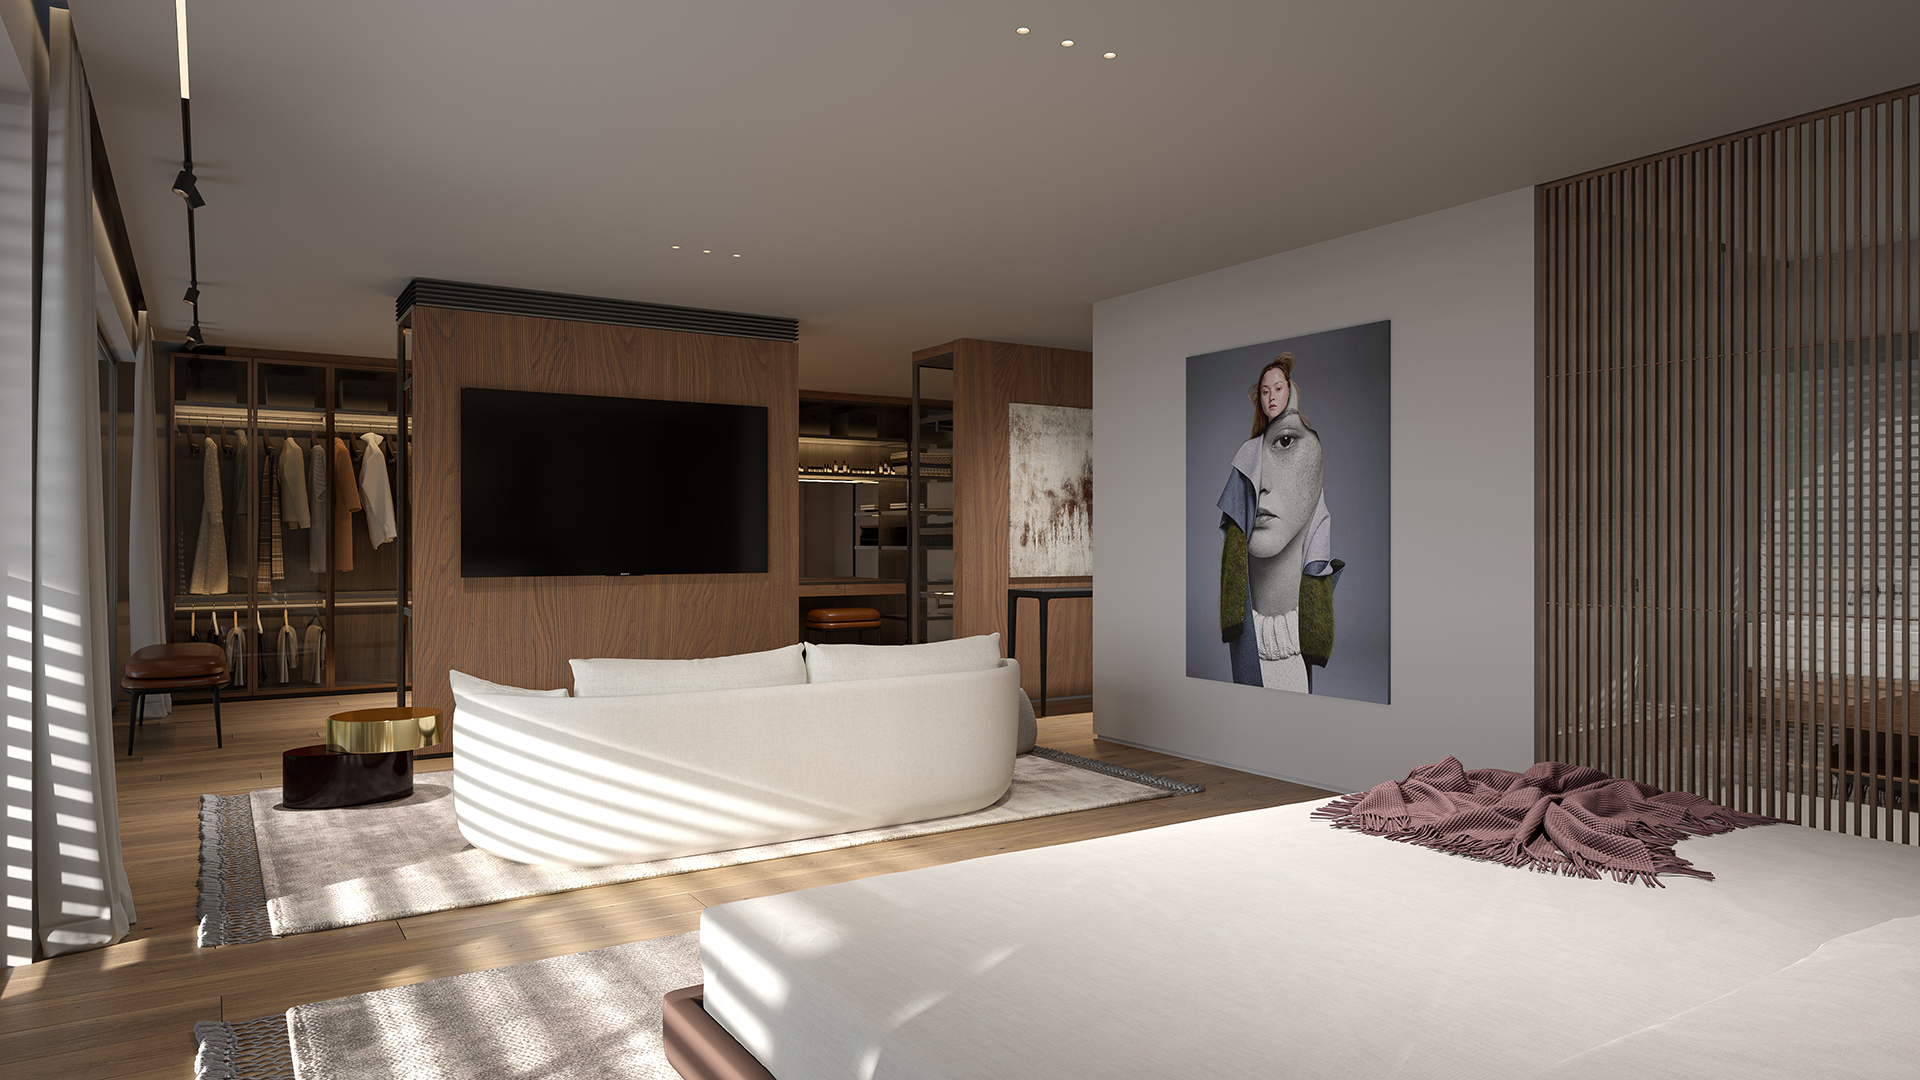 Maayan-Golan_Architectural-Visualization_interior-visualization_private-residential_master-bedroom_interior-design-by-tal-tamir_03